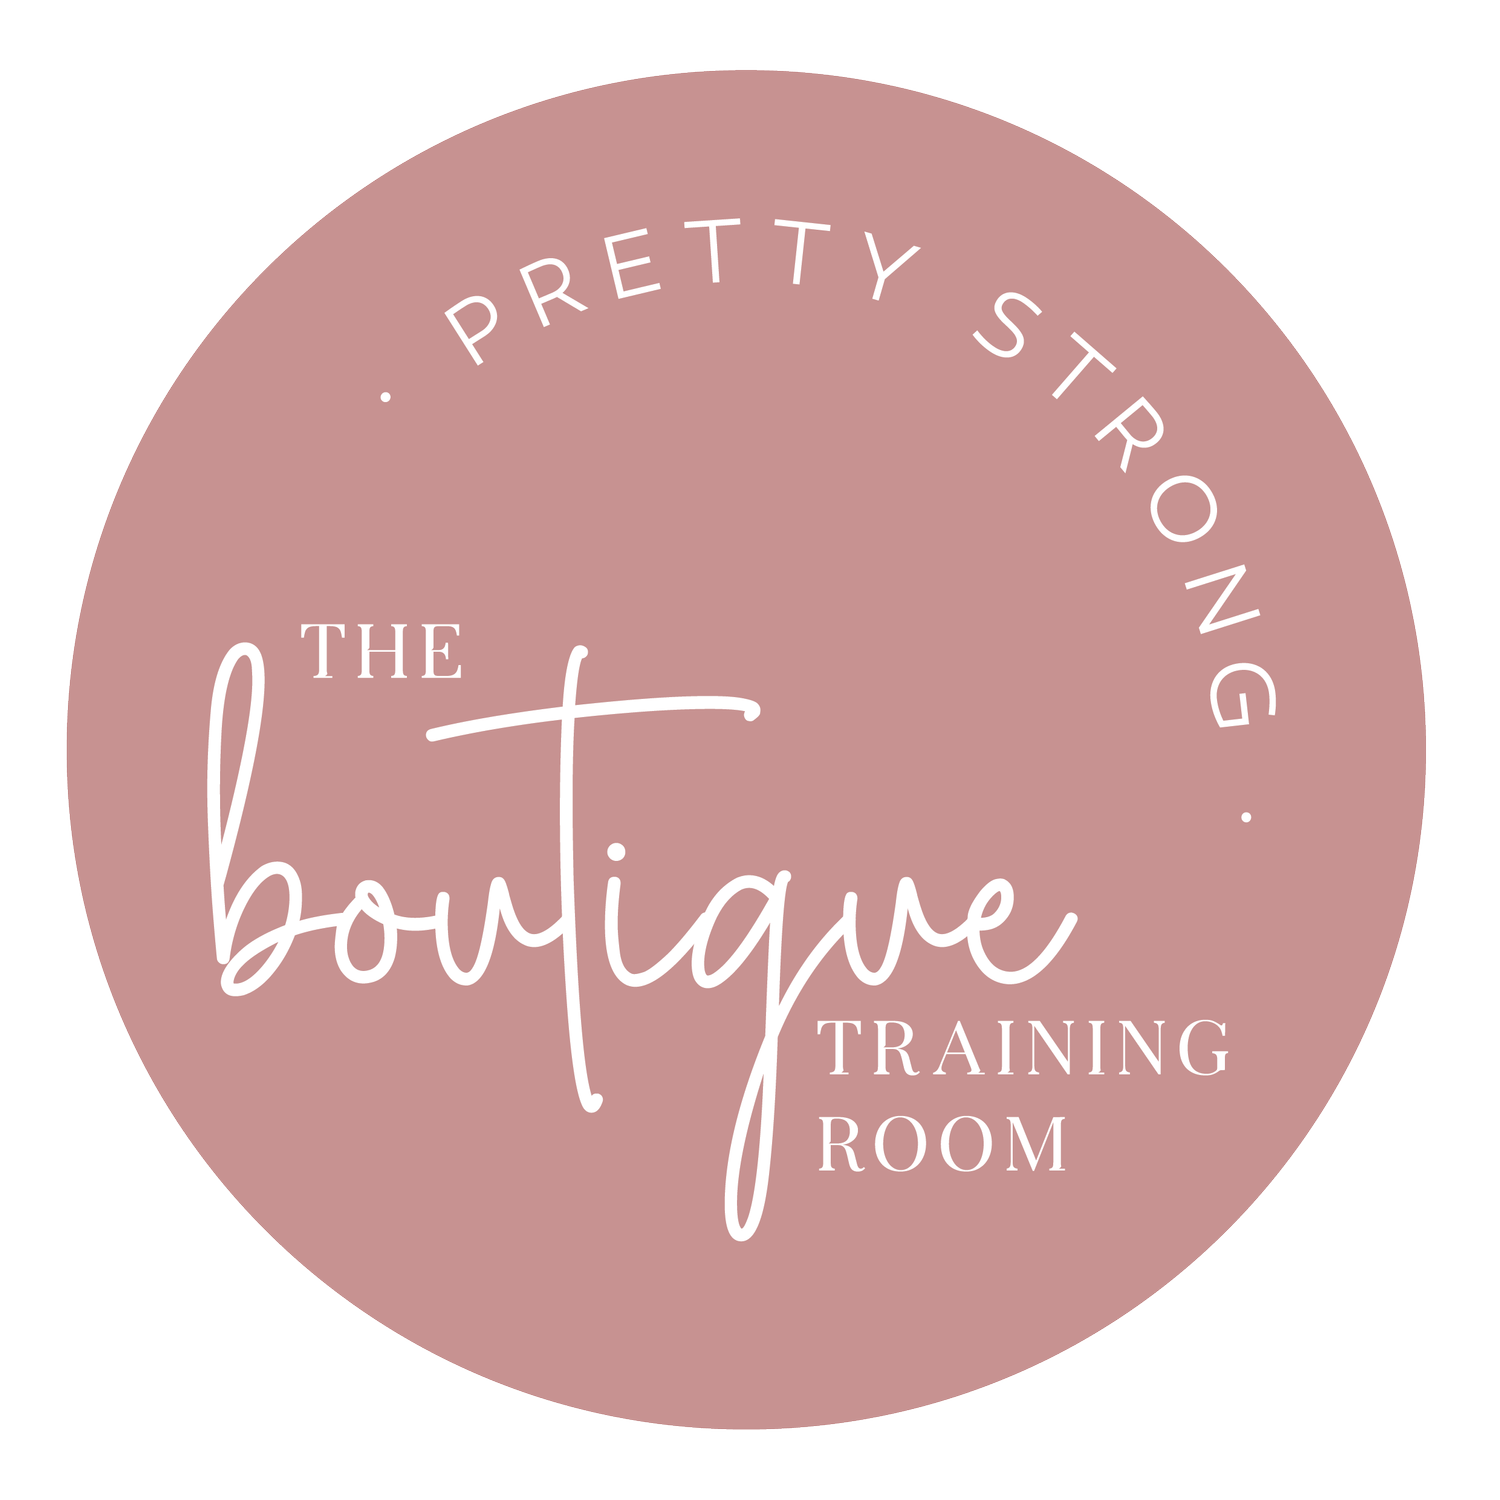 The Boutique Training Room